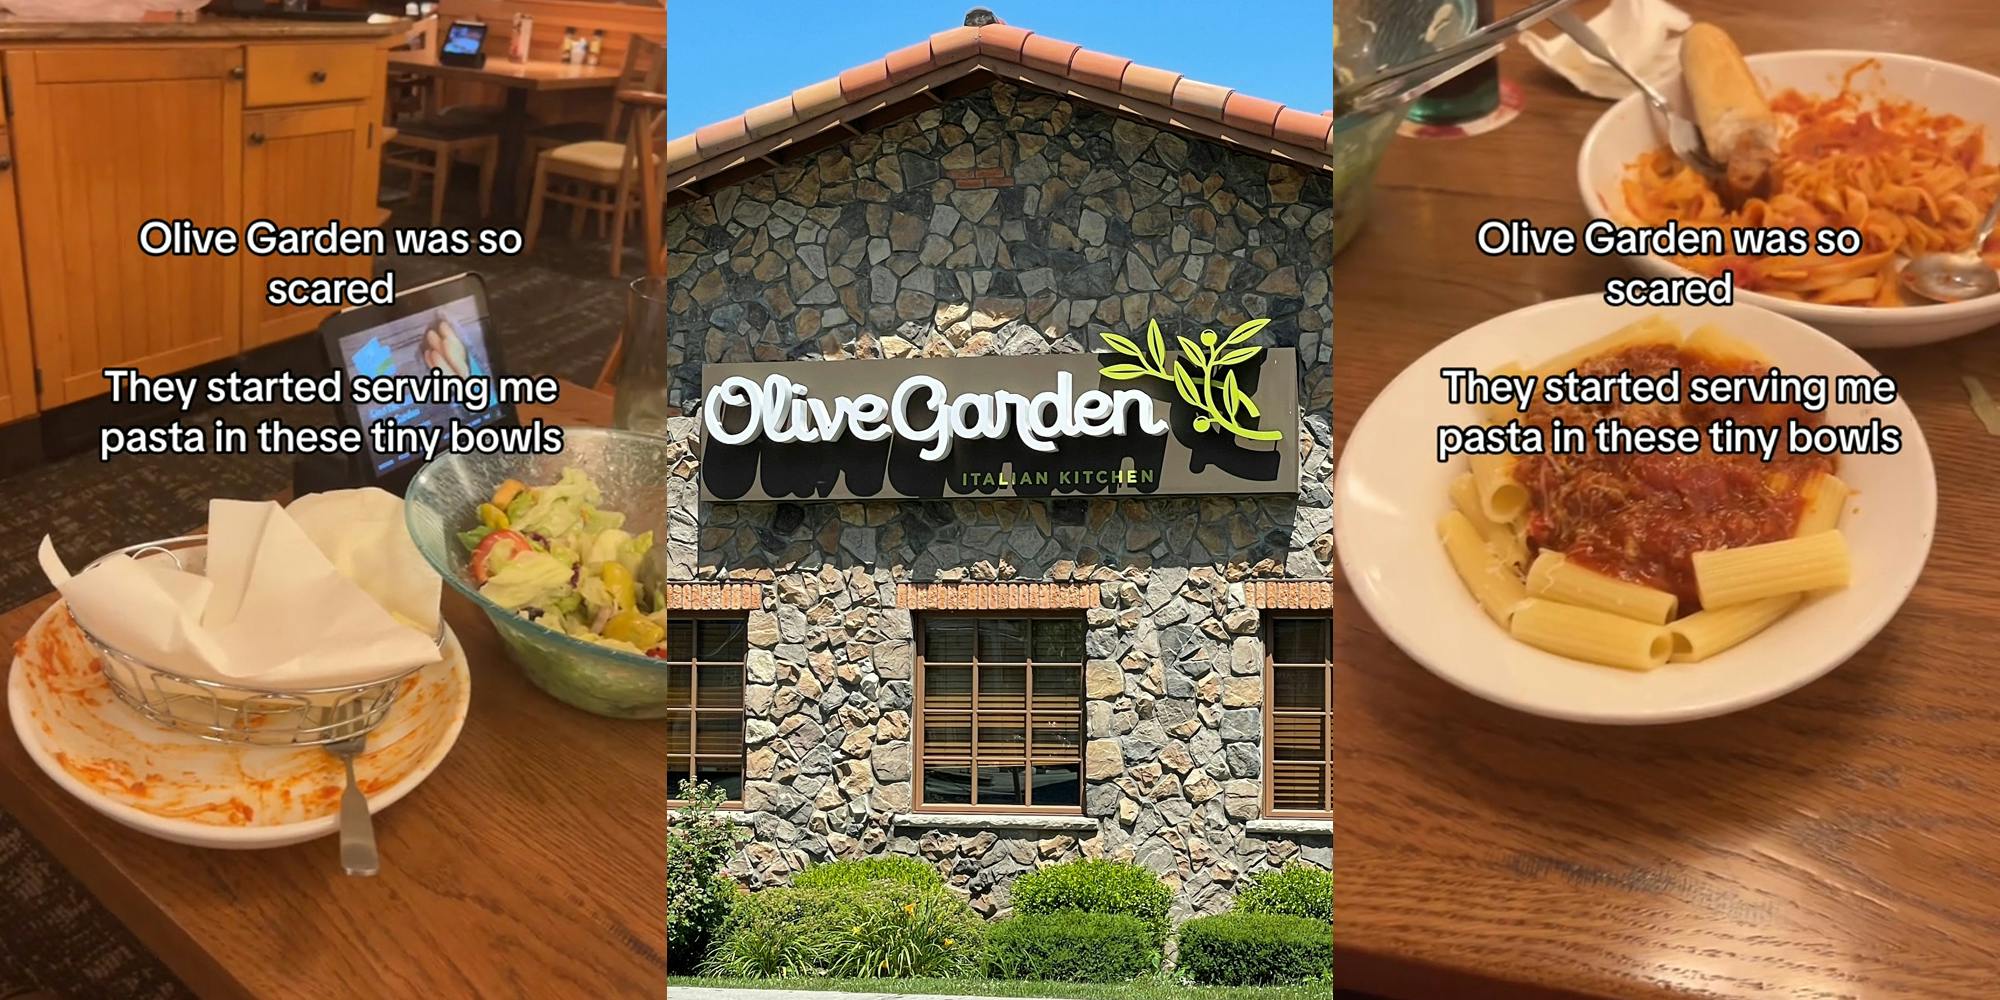 Olive Garden bowls on table with caption "Olive Garden was so scared They started serving me pasta in these tiny bowls" (l) Olive Garden building with sign (c) Olive Garden bowls on table with caption "Olive Garden was so scared They started serving me pasta in these tiny bowls" (r)